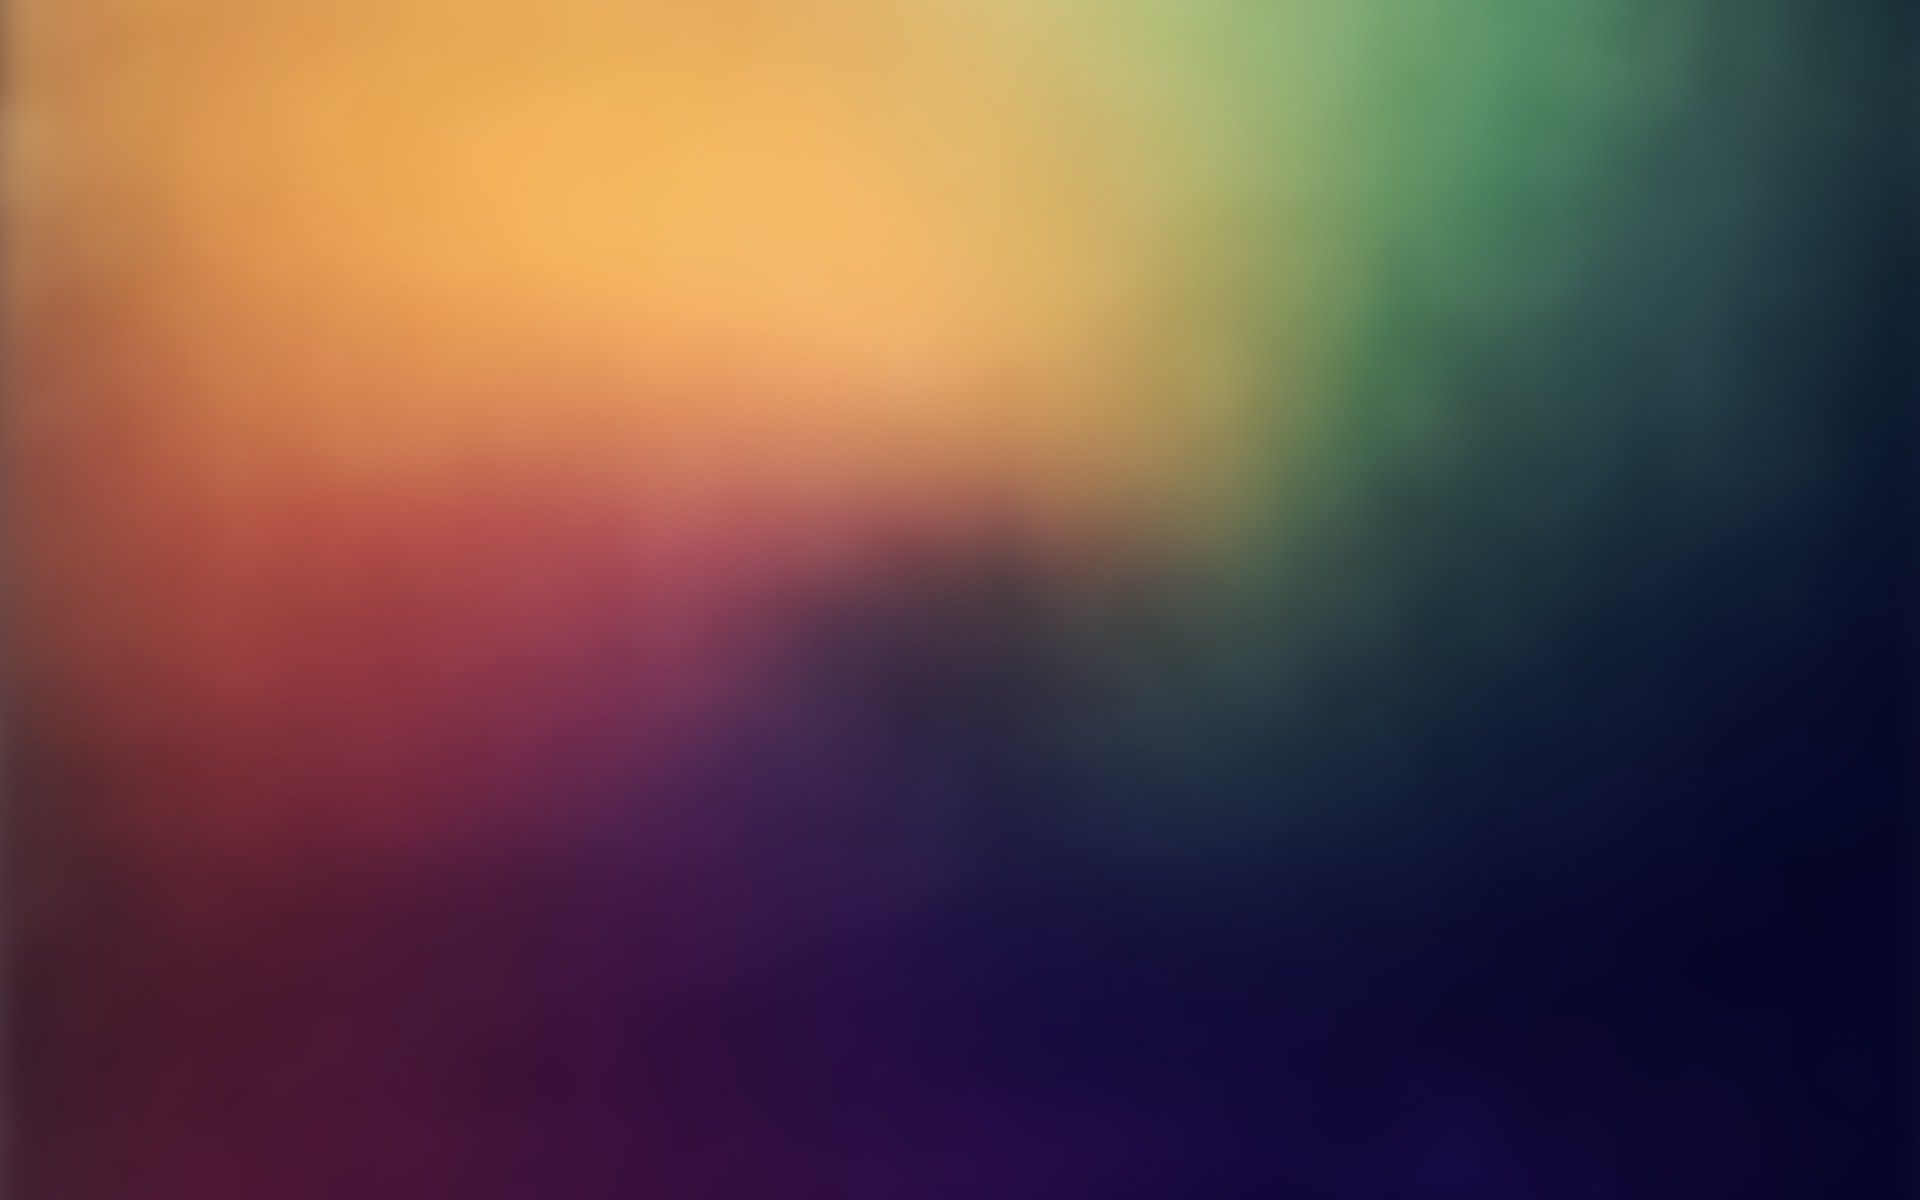 htc, Like, Abstract, Rainbows, Colors Wallpaper